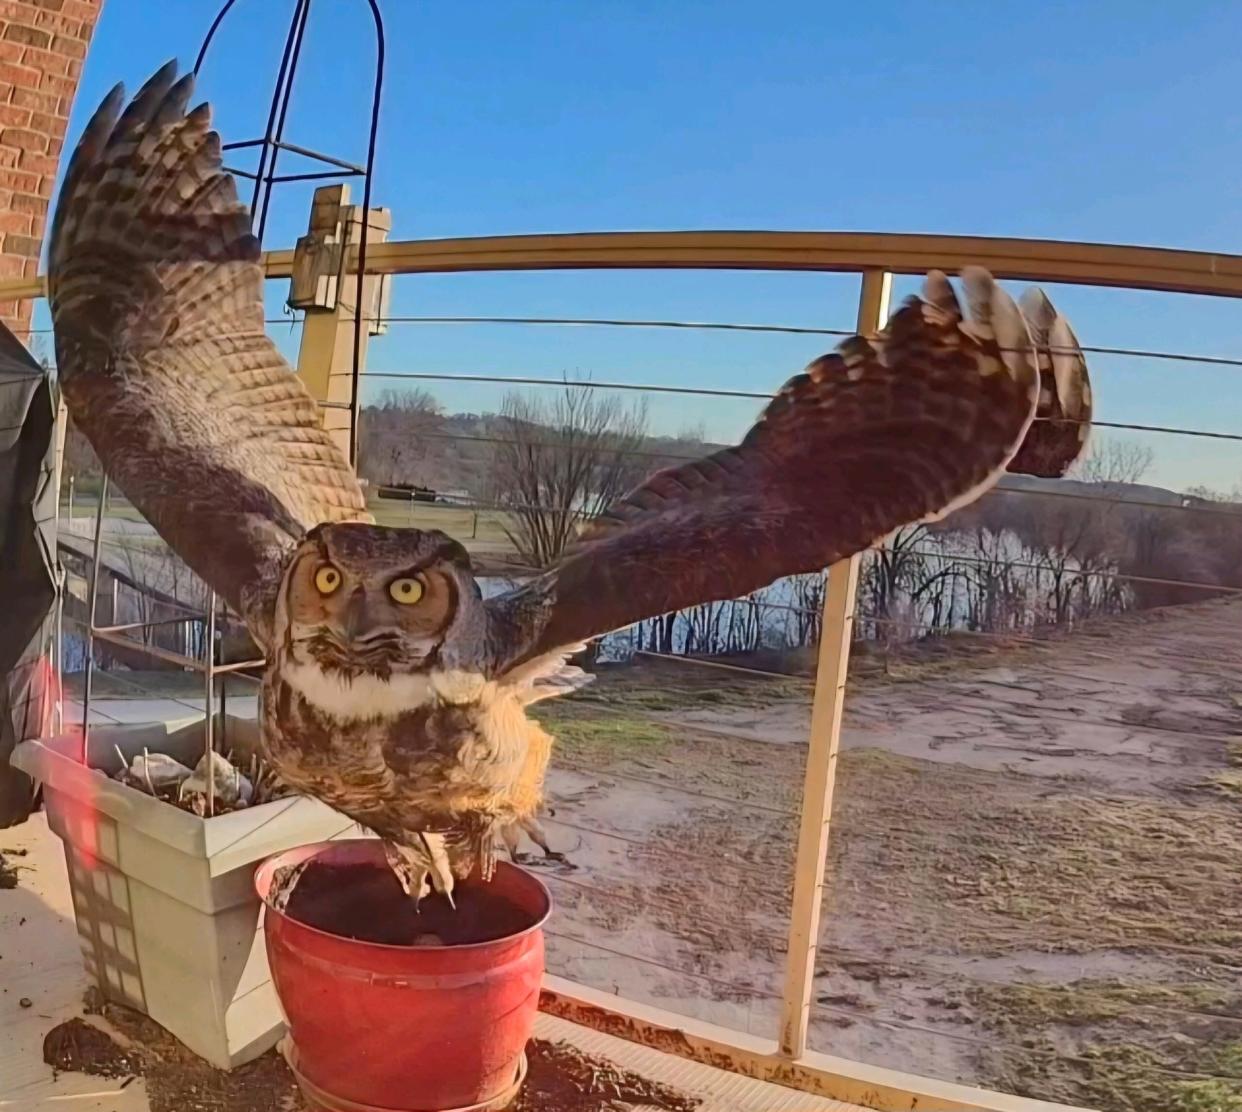 A female great-horned owl flies above its nest on the balcony of John and Christine Moczynski of West Bend. The bird, named River by the Moczynskis, abandoned the nest in mid-April after laying two eggs and brooding the eggs for about a month. The image was captured with a camera placed on the balcony.